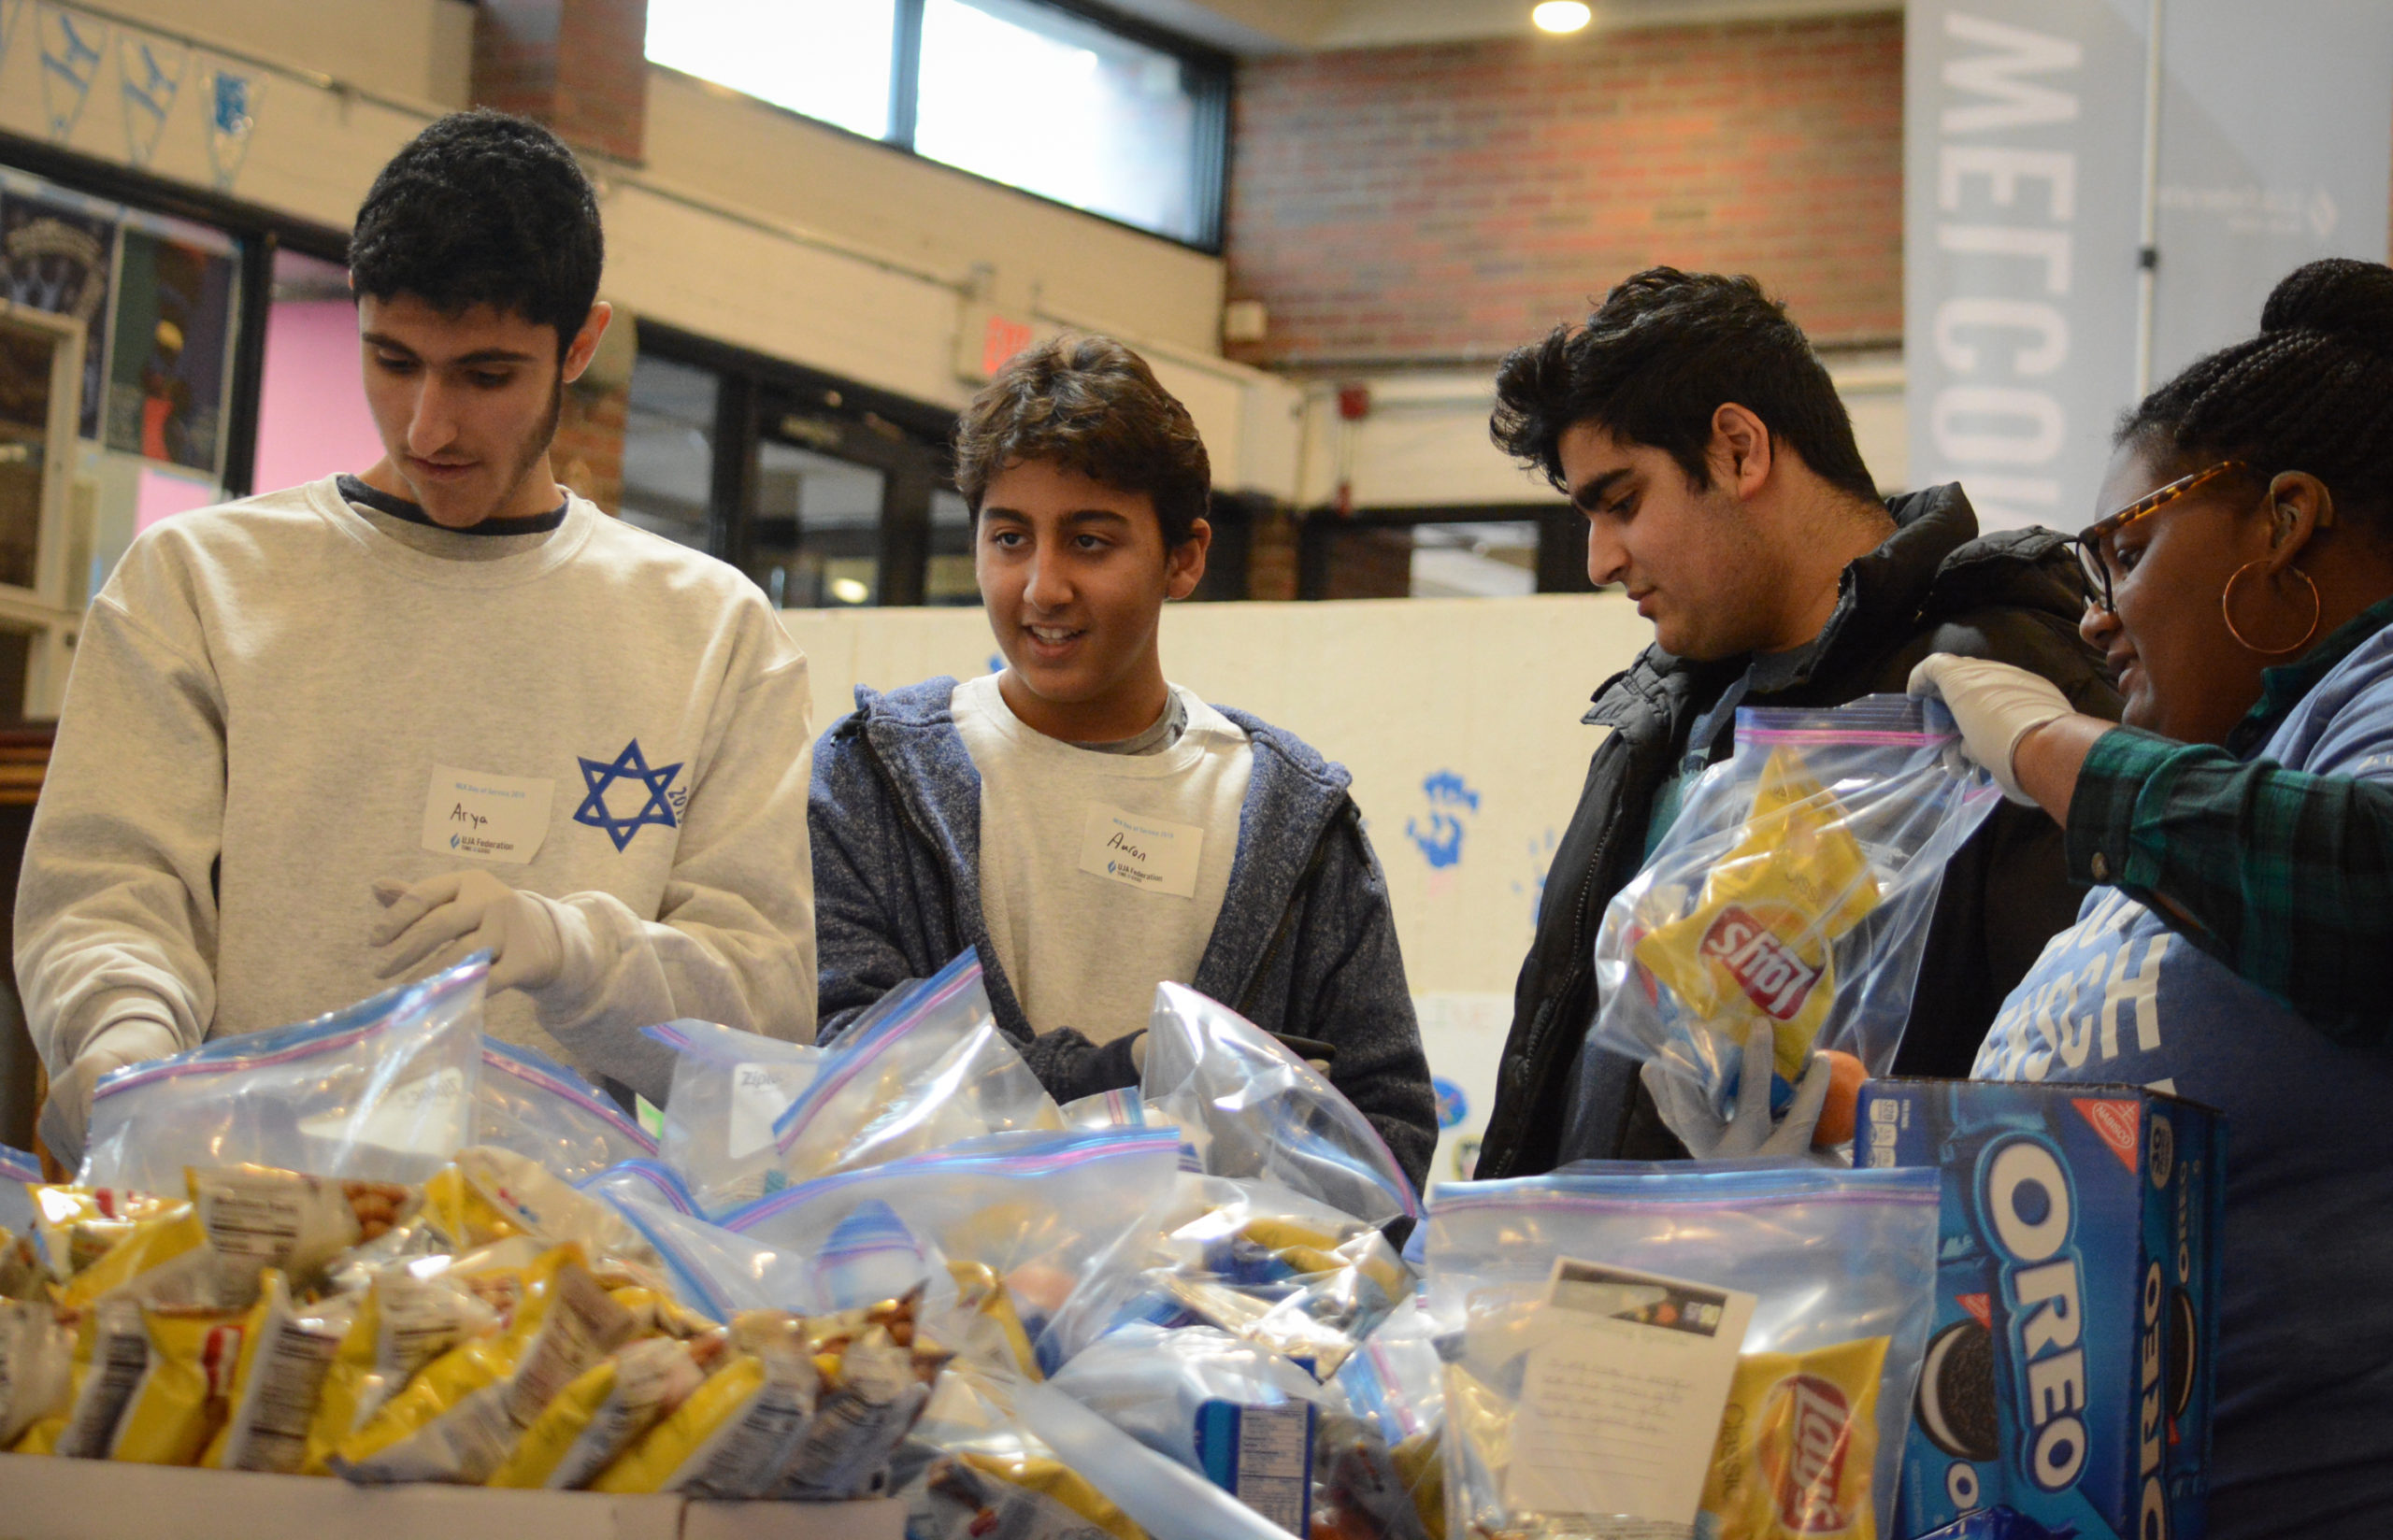 A group of teens work together to assemble bags of goods for the Interfaith Nutrition Network as part of the Martin Luther King Day of Service. (Photo by Janelle Clausen)